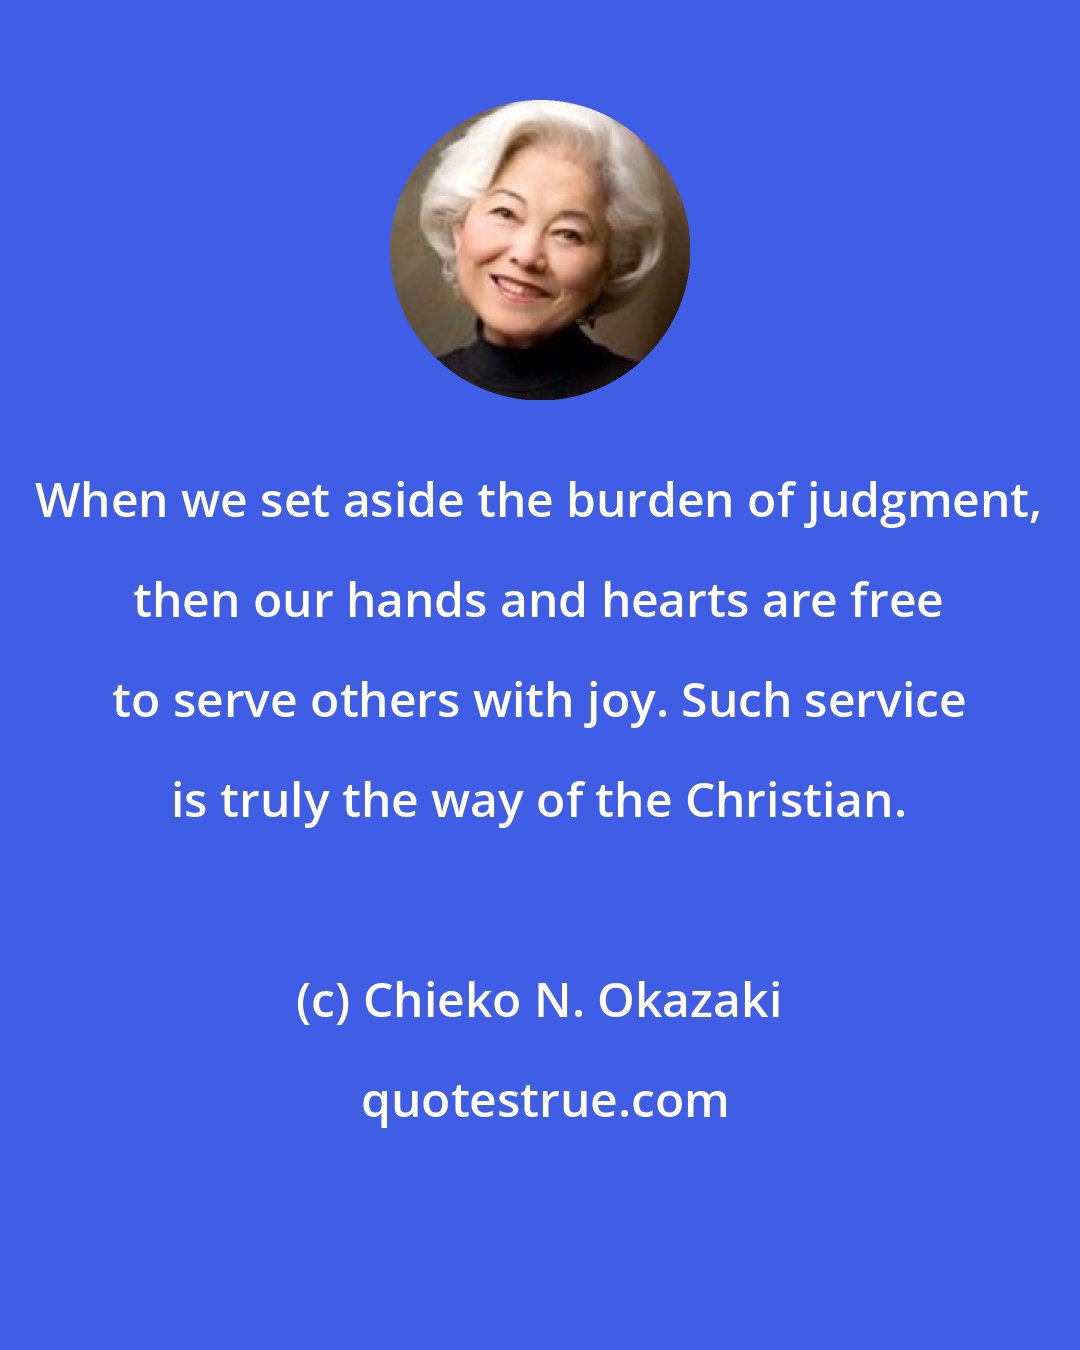 Chieko N. Okazaki: When we set aside the burden of judgment, then our hands and hearts are free to serve others with joy. Such service is truly the way of the Christian.